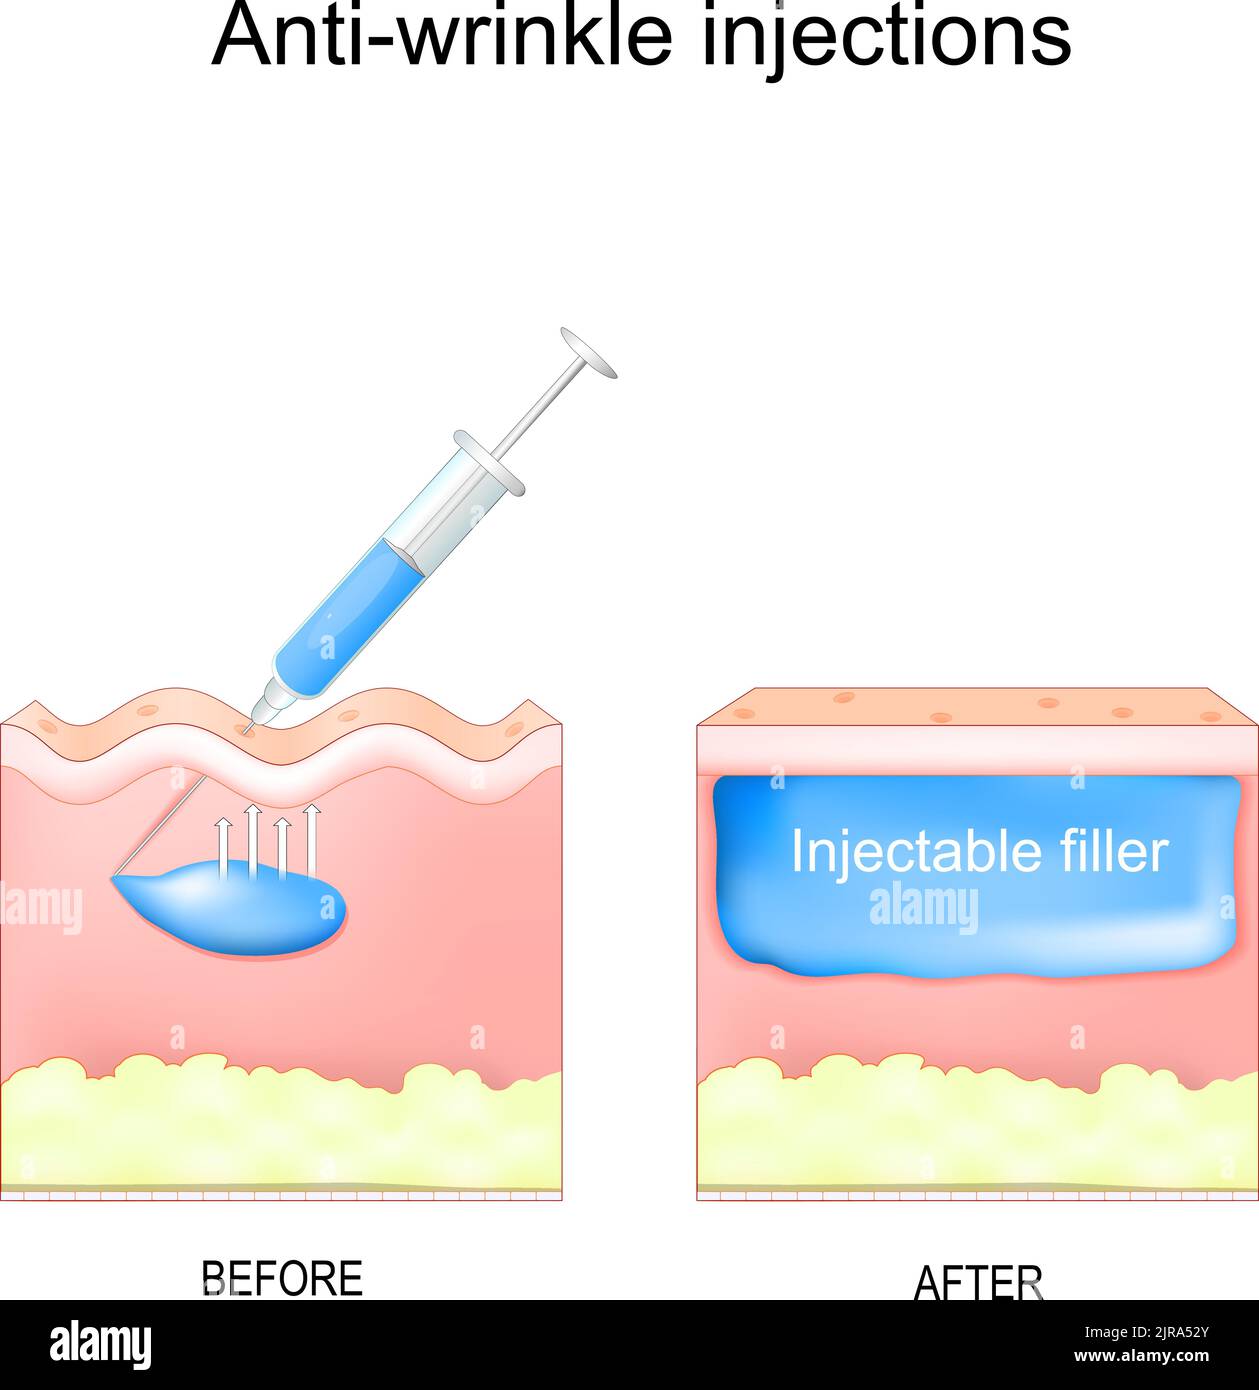 Anti-wrinkle injections. aesthetic procedure. rejuvenate the skin without surgery. Human skin with facial wrinkles before and after filler injected. s Stock Vector